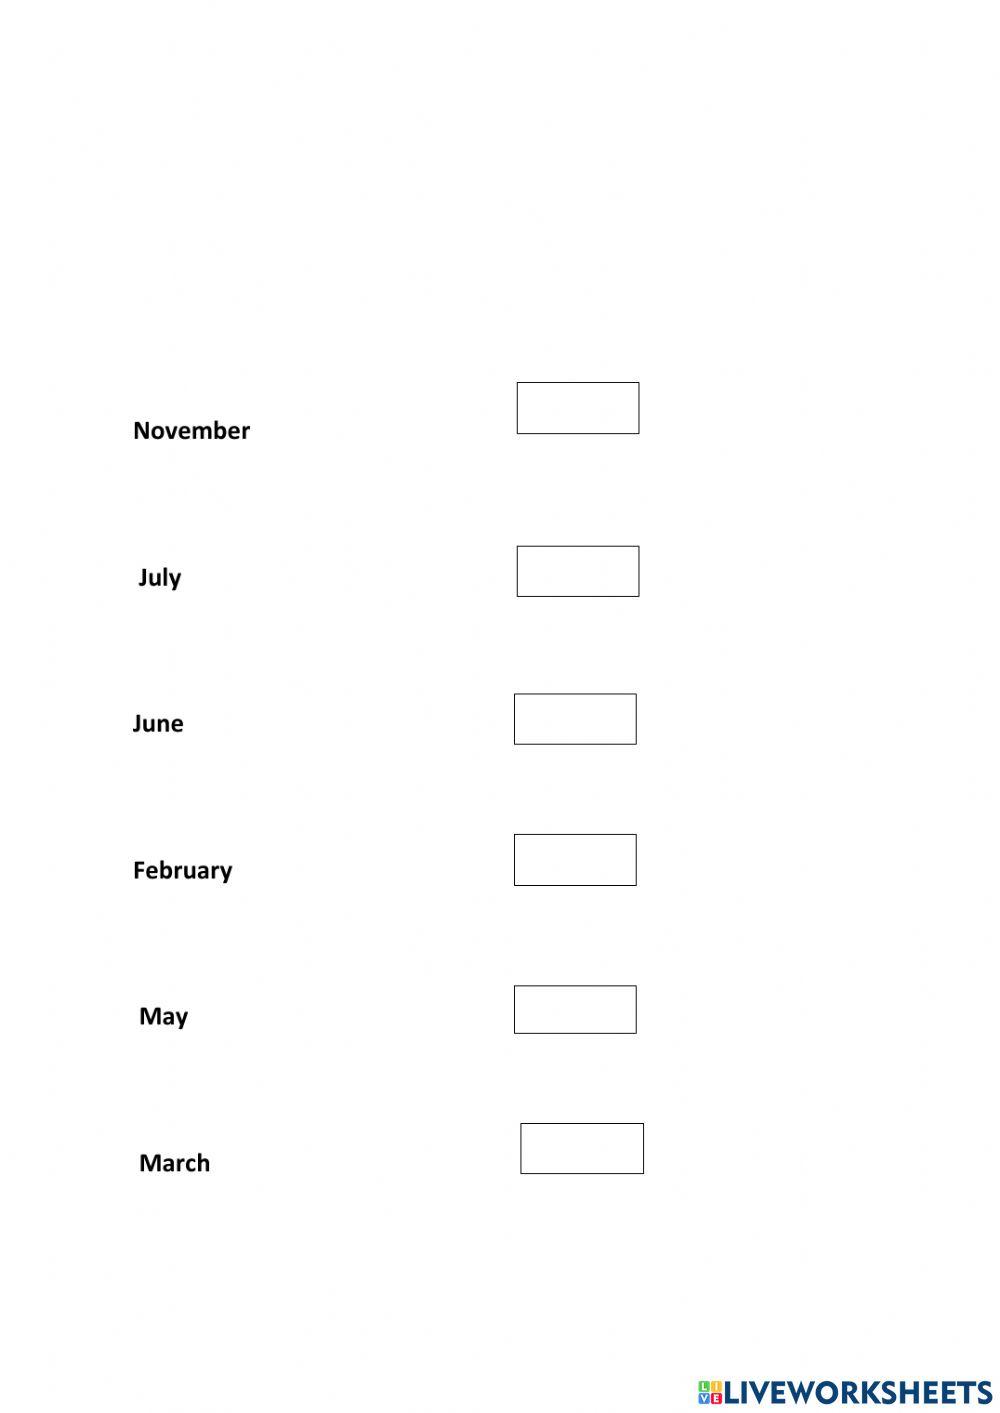 Type the number of months in order